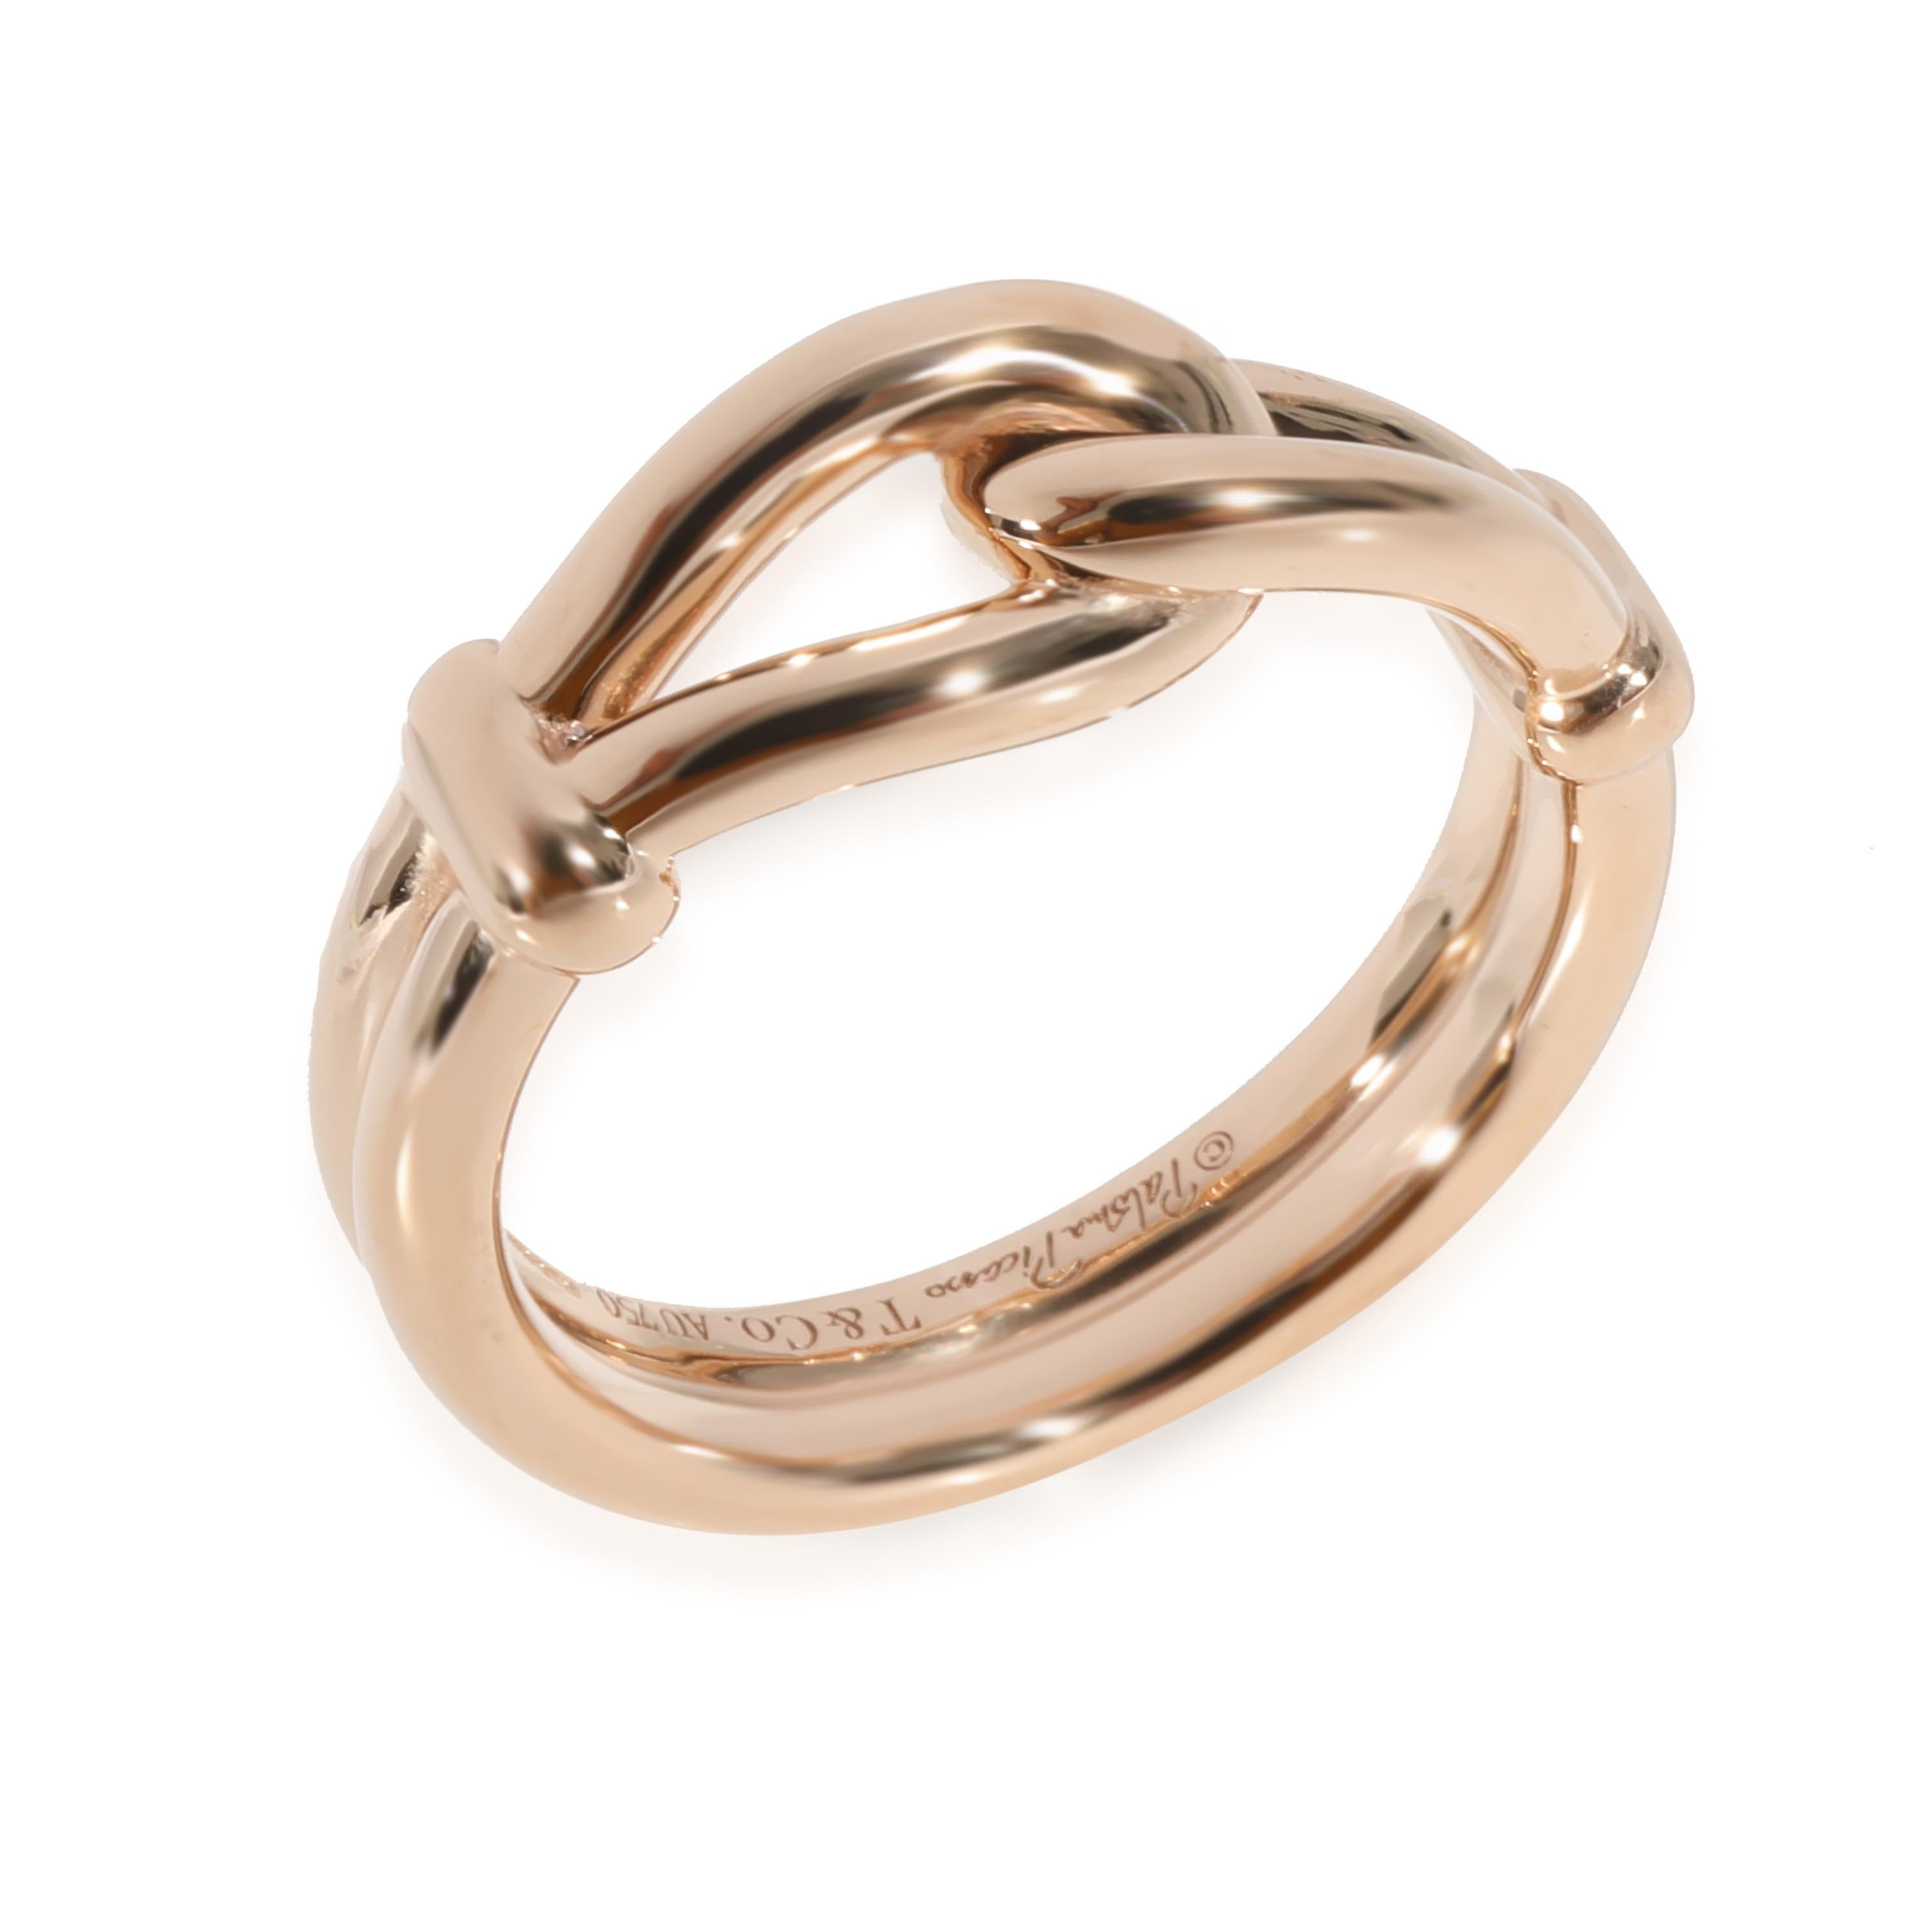 Tiffany & Co. Paloma Picasso Ring in 18k Rose Gold

PRIMARY DETAILS
SKU: 128829
Listing Title: Tiffany & Co. Paloma Picasso Ring in 18k Rose Gold
Condition Description: The daughter of artist Pablo Picasso and painter Françoise Gilot, Paloma Picasso